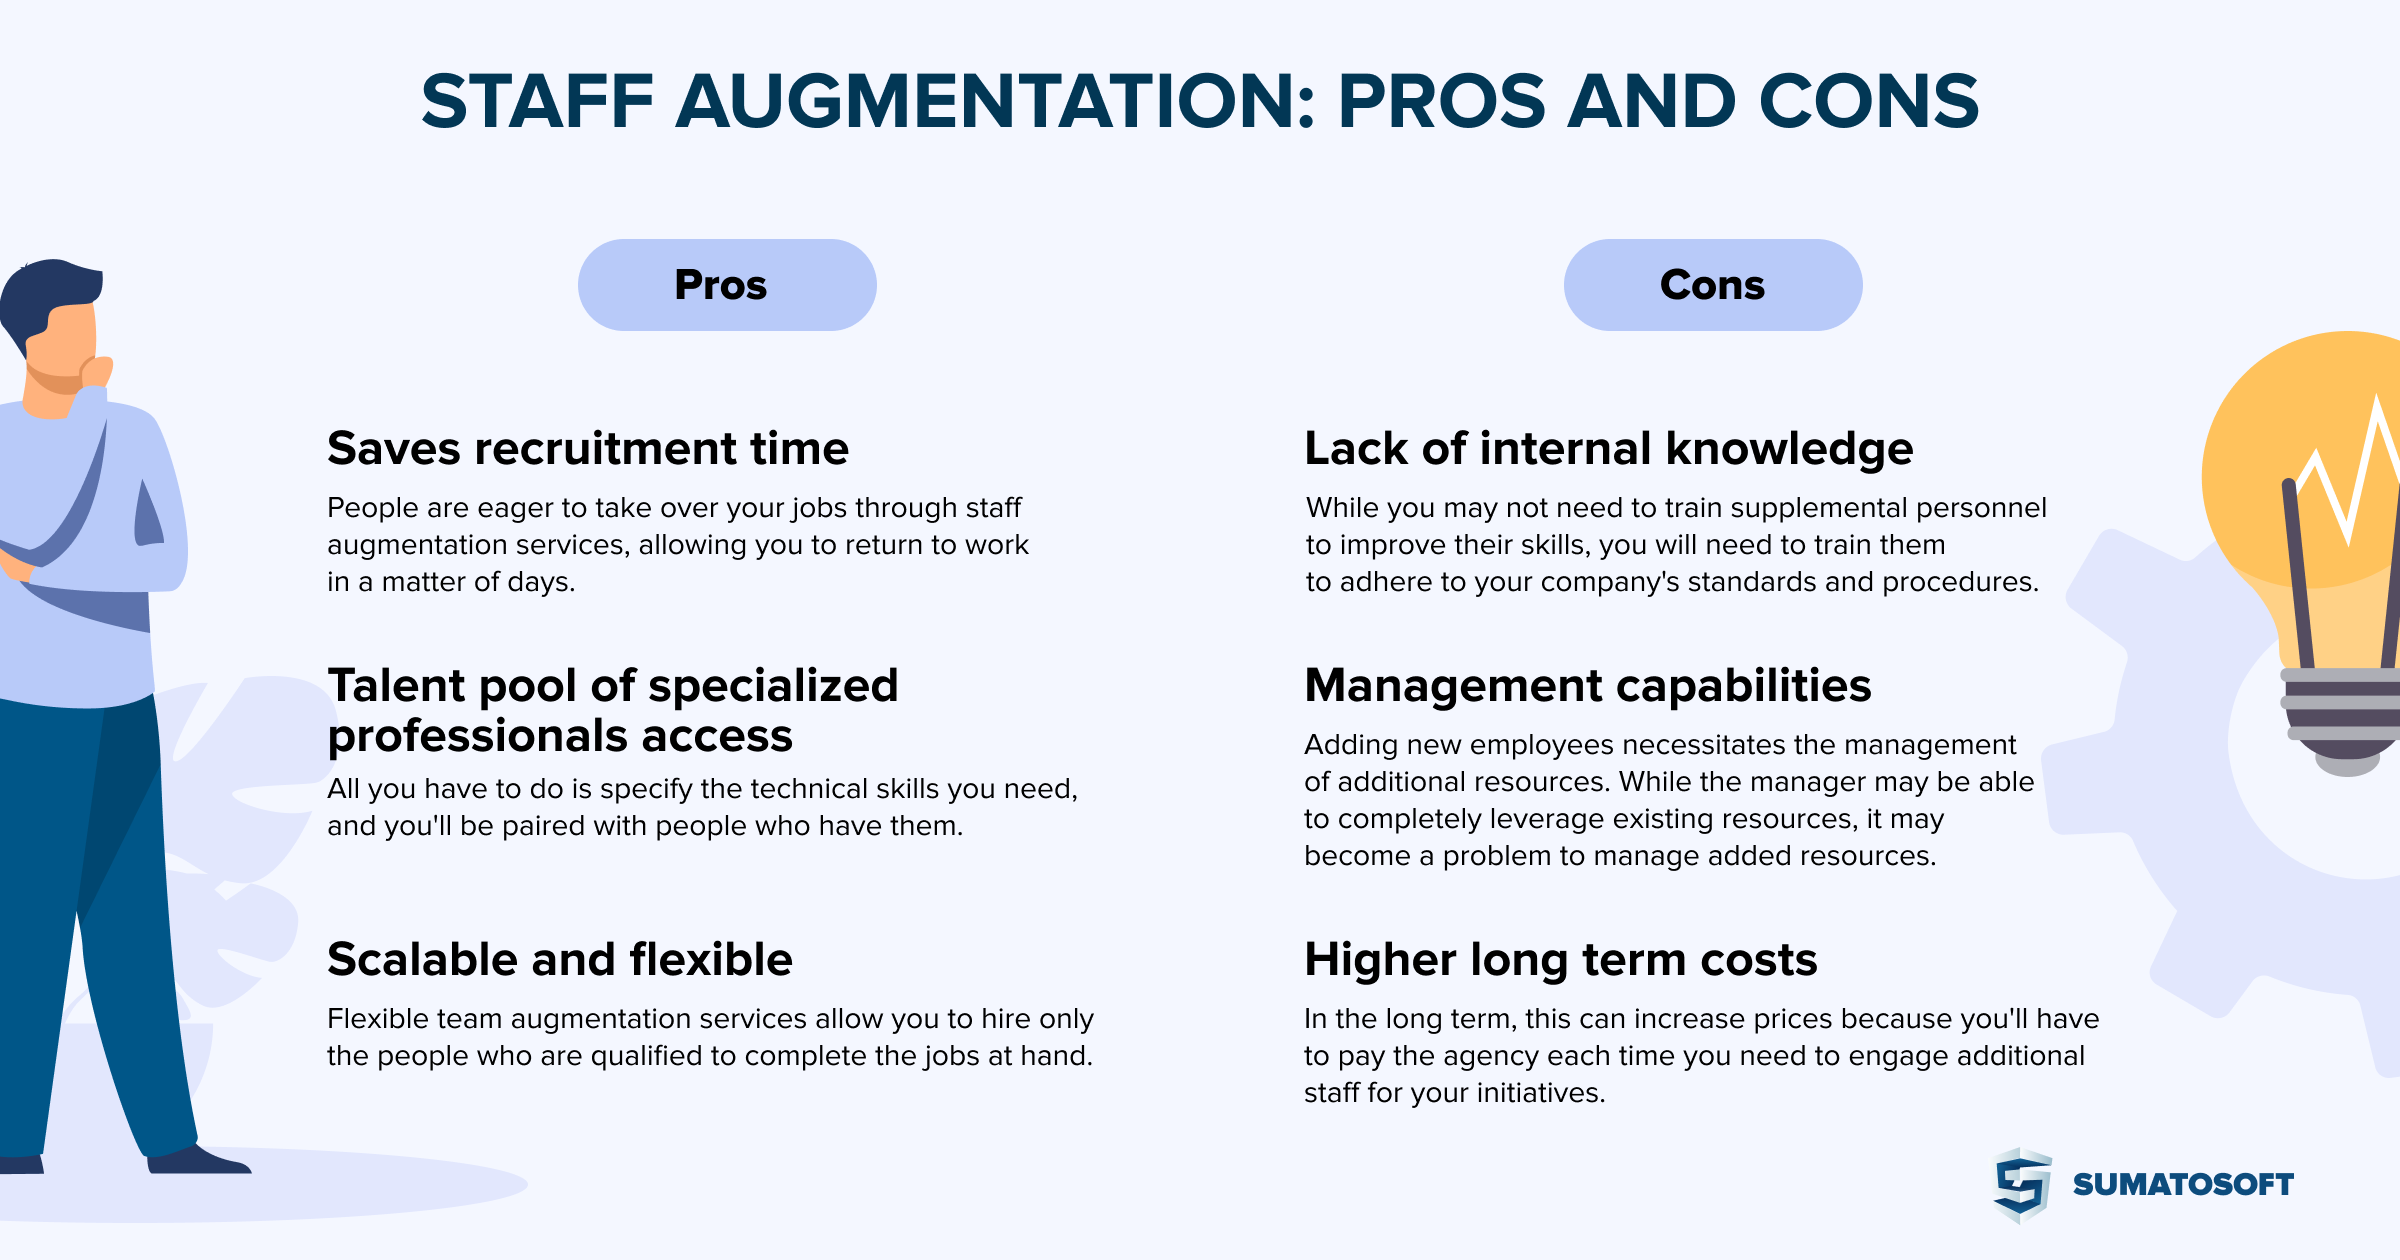 Pros and Cons of Staff Augmentation